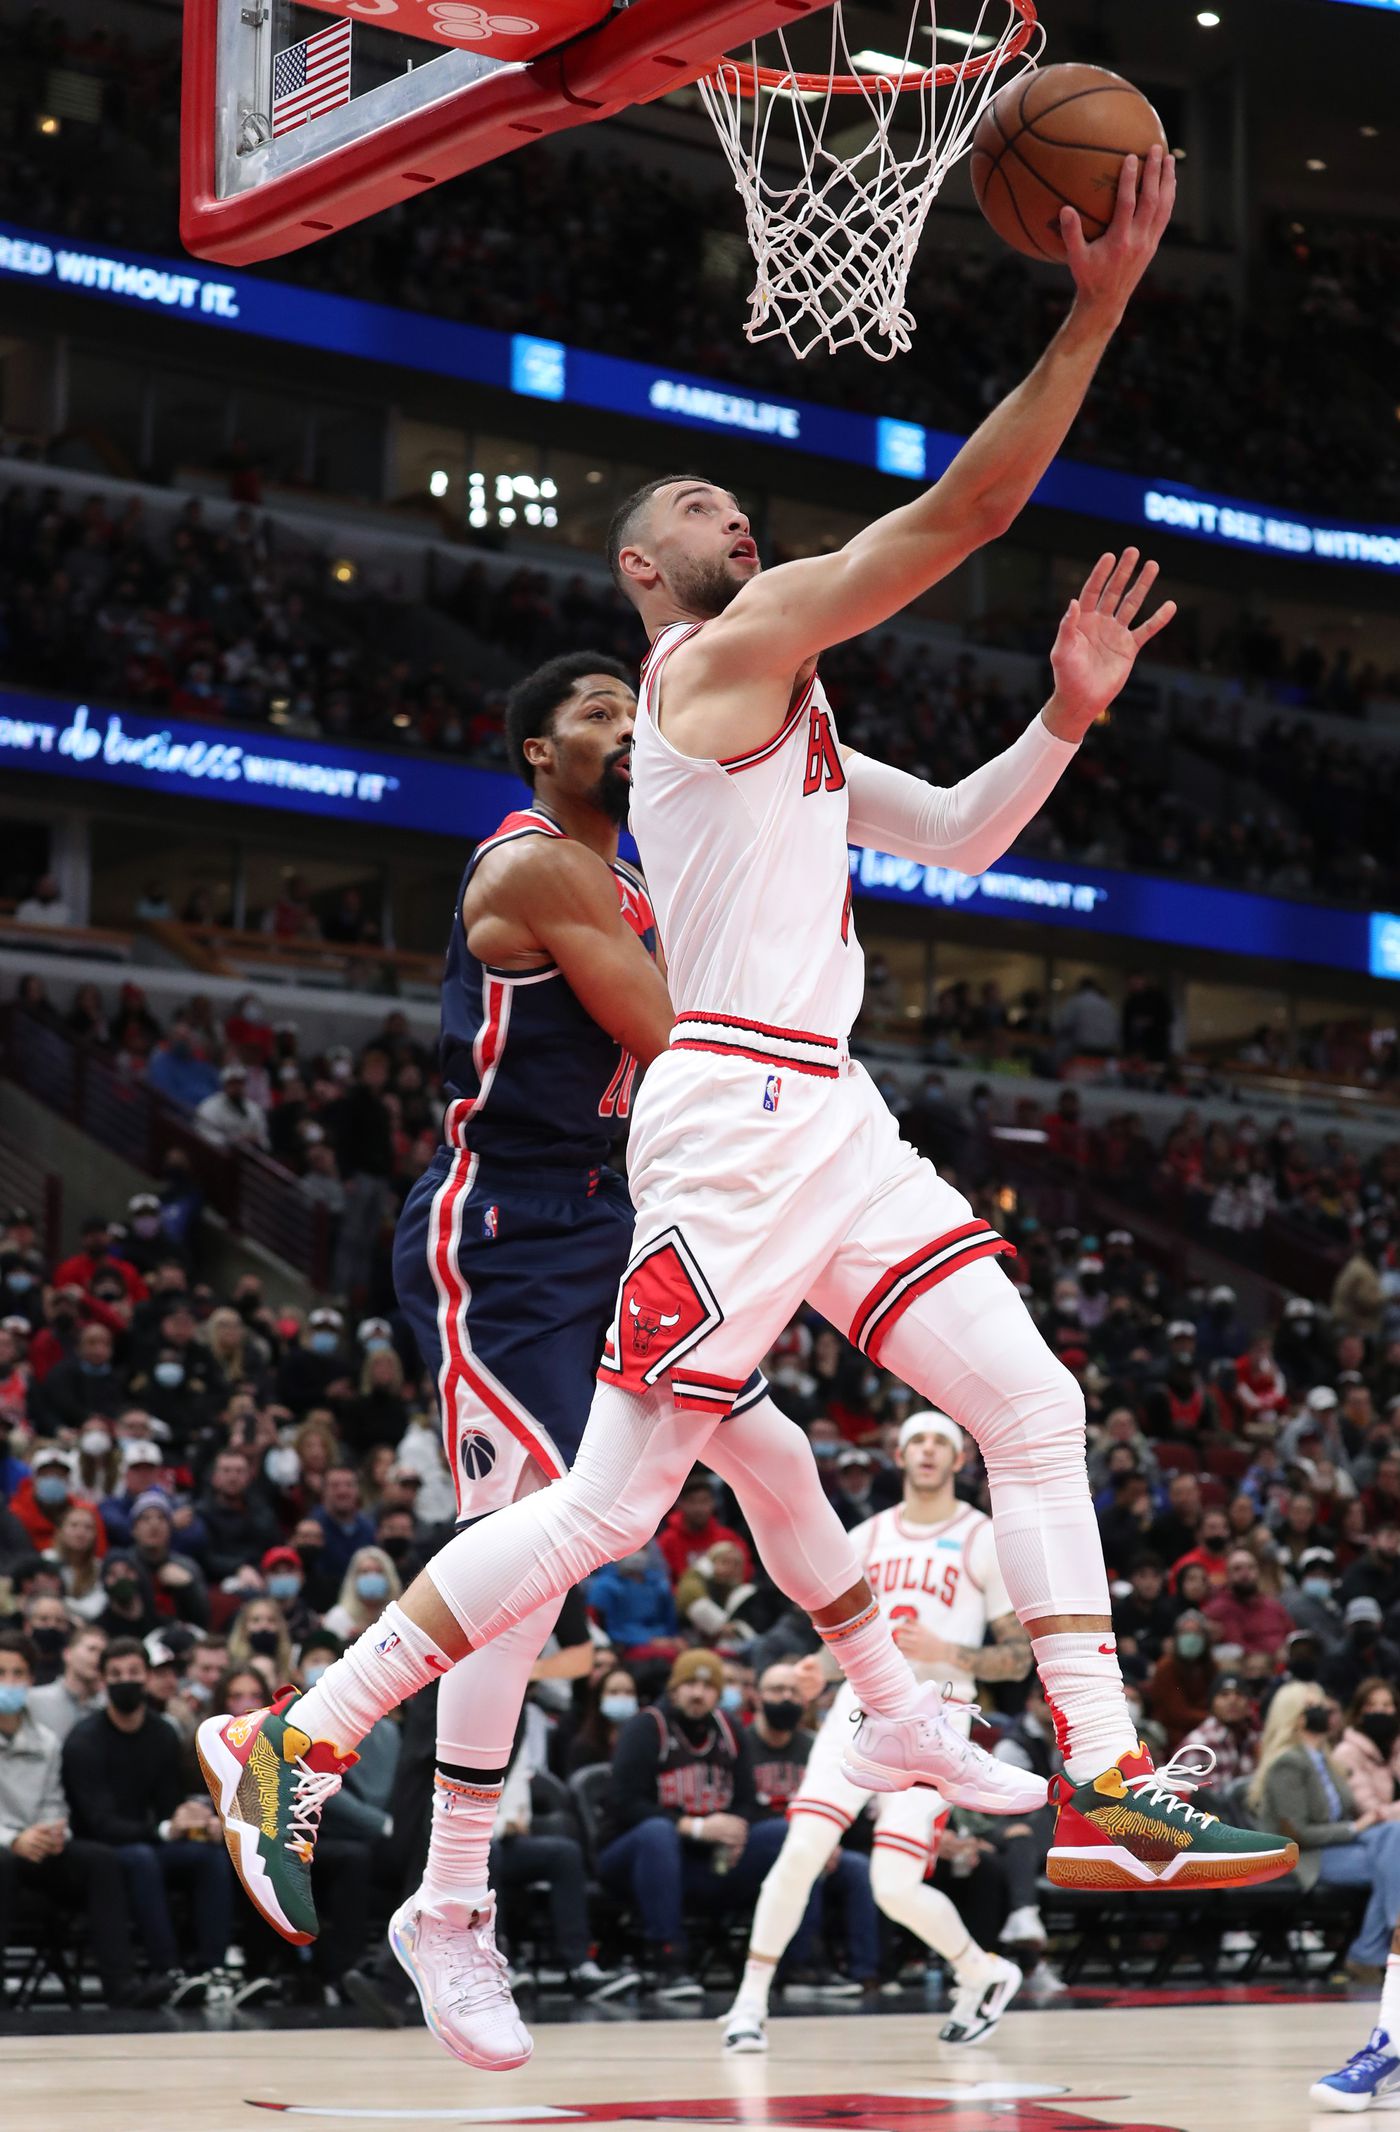 Chicago Bulls guard Zach LaVine (8) makes a reverse layup in the first quarter against the Washington Wizards at United Center on Jan. 7, 2022, in Chicago.